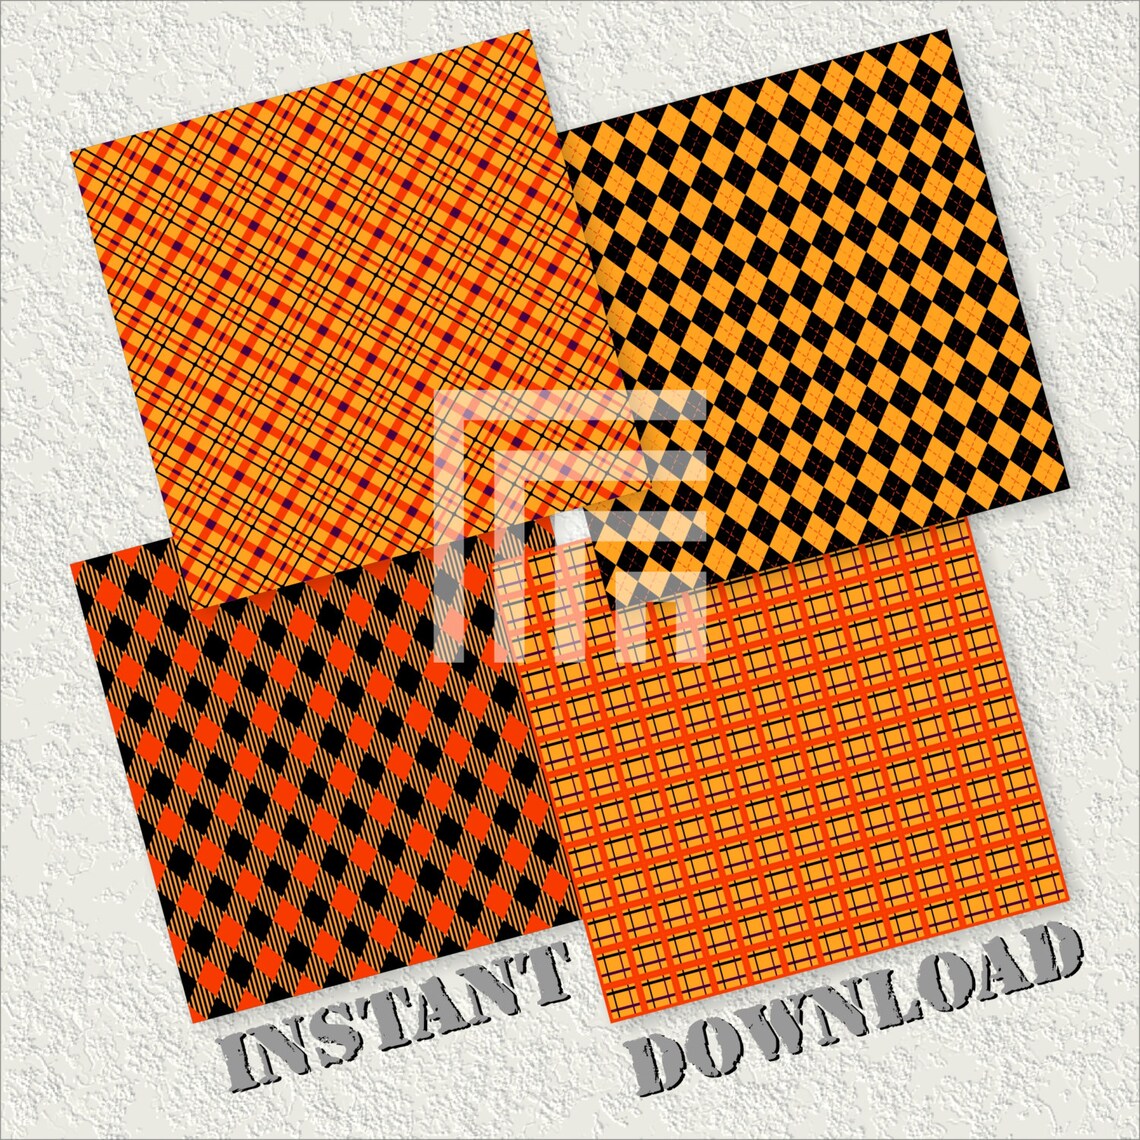 HALLOWEEN Digital Paper Pack by GGGsign
.
gggsign.etsy.com
.
etsy.com/listing/463321…
.
#halloween #happyhalloween #craftpaper #digitalpaperpack #designerpapers #patterns #pattern #backgrounds #diyplanner #stickerscover #etsy #etsyshop #bestofetsy #etsystore #paper